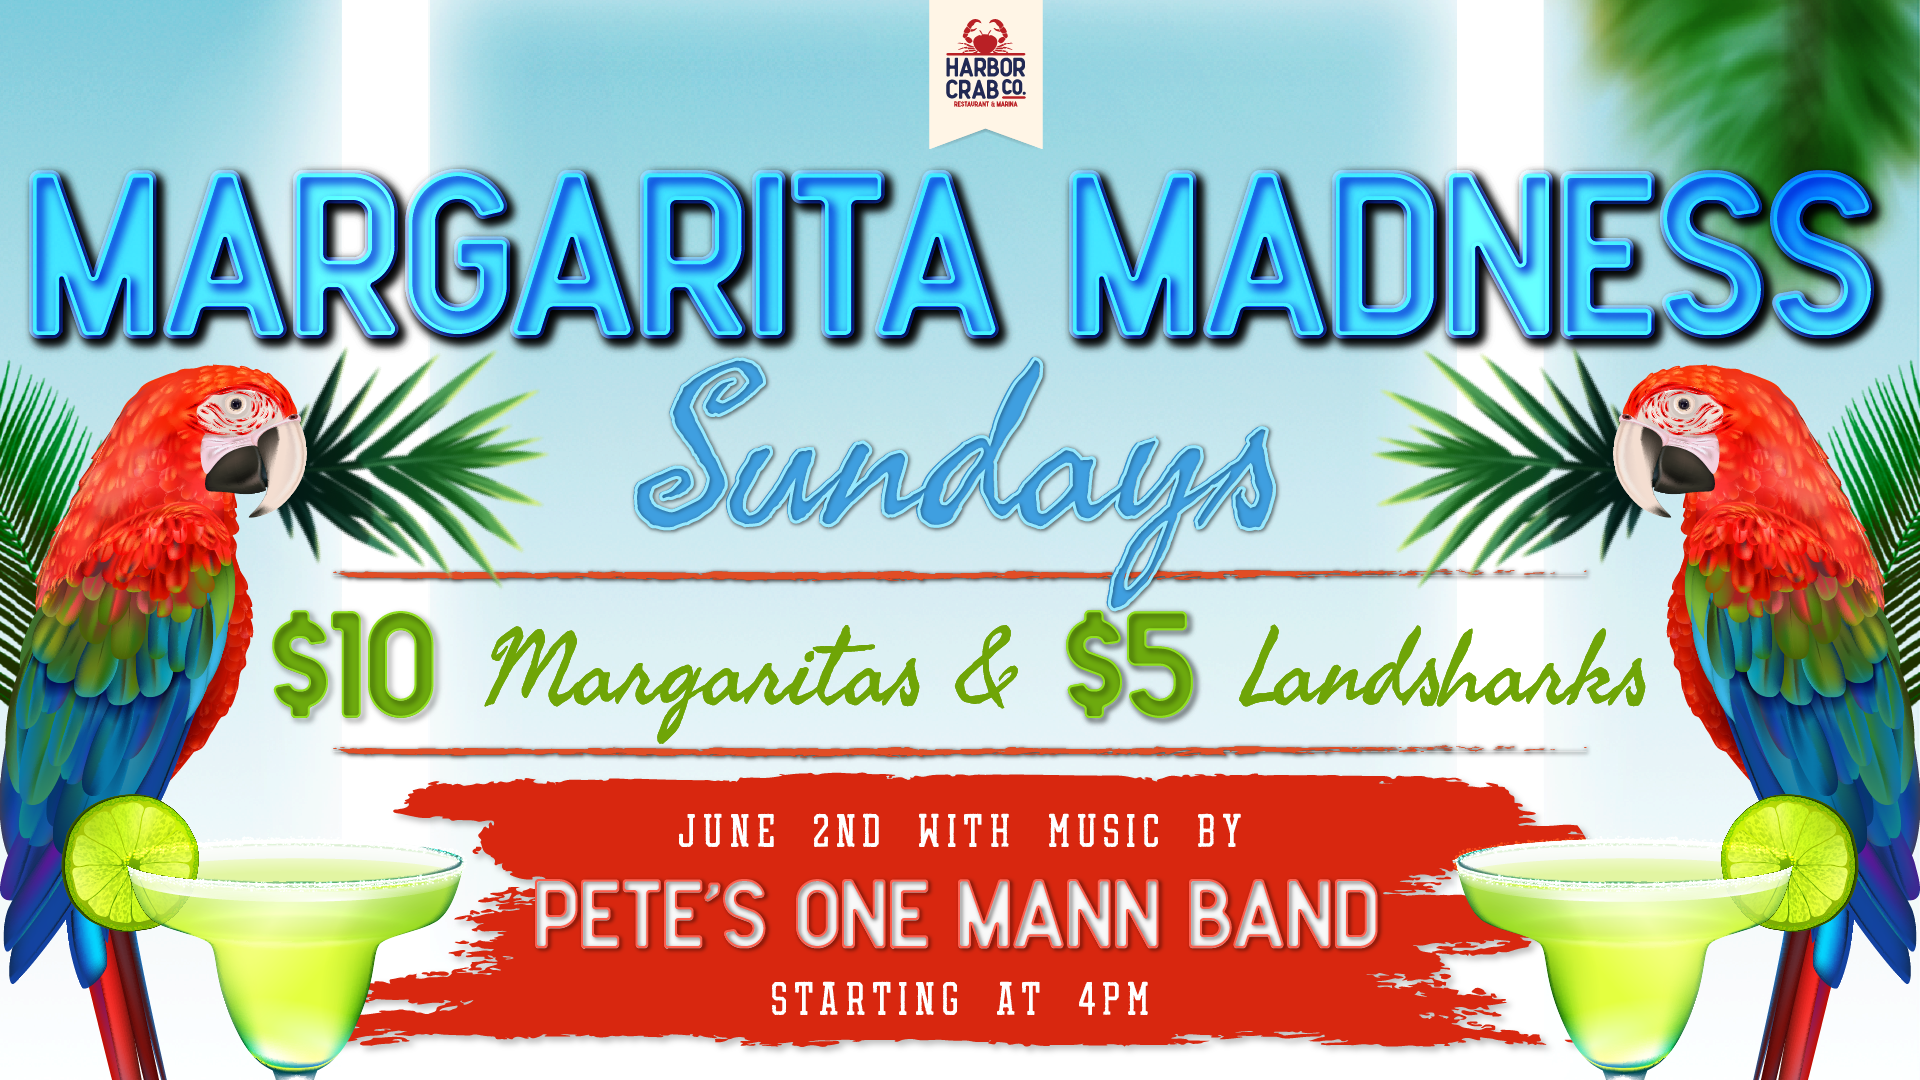 Margarita Madness Sundays with $10 margaritas, $5 Landsharks, and Pete’s One Mann Band on June 2nd at 4pm.

